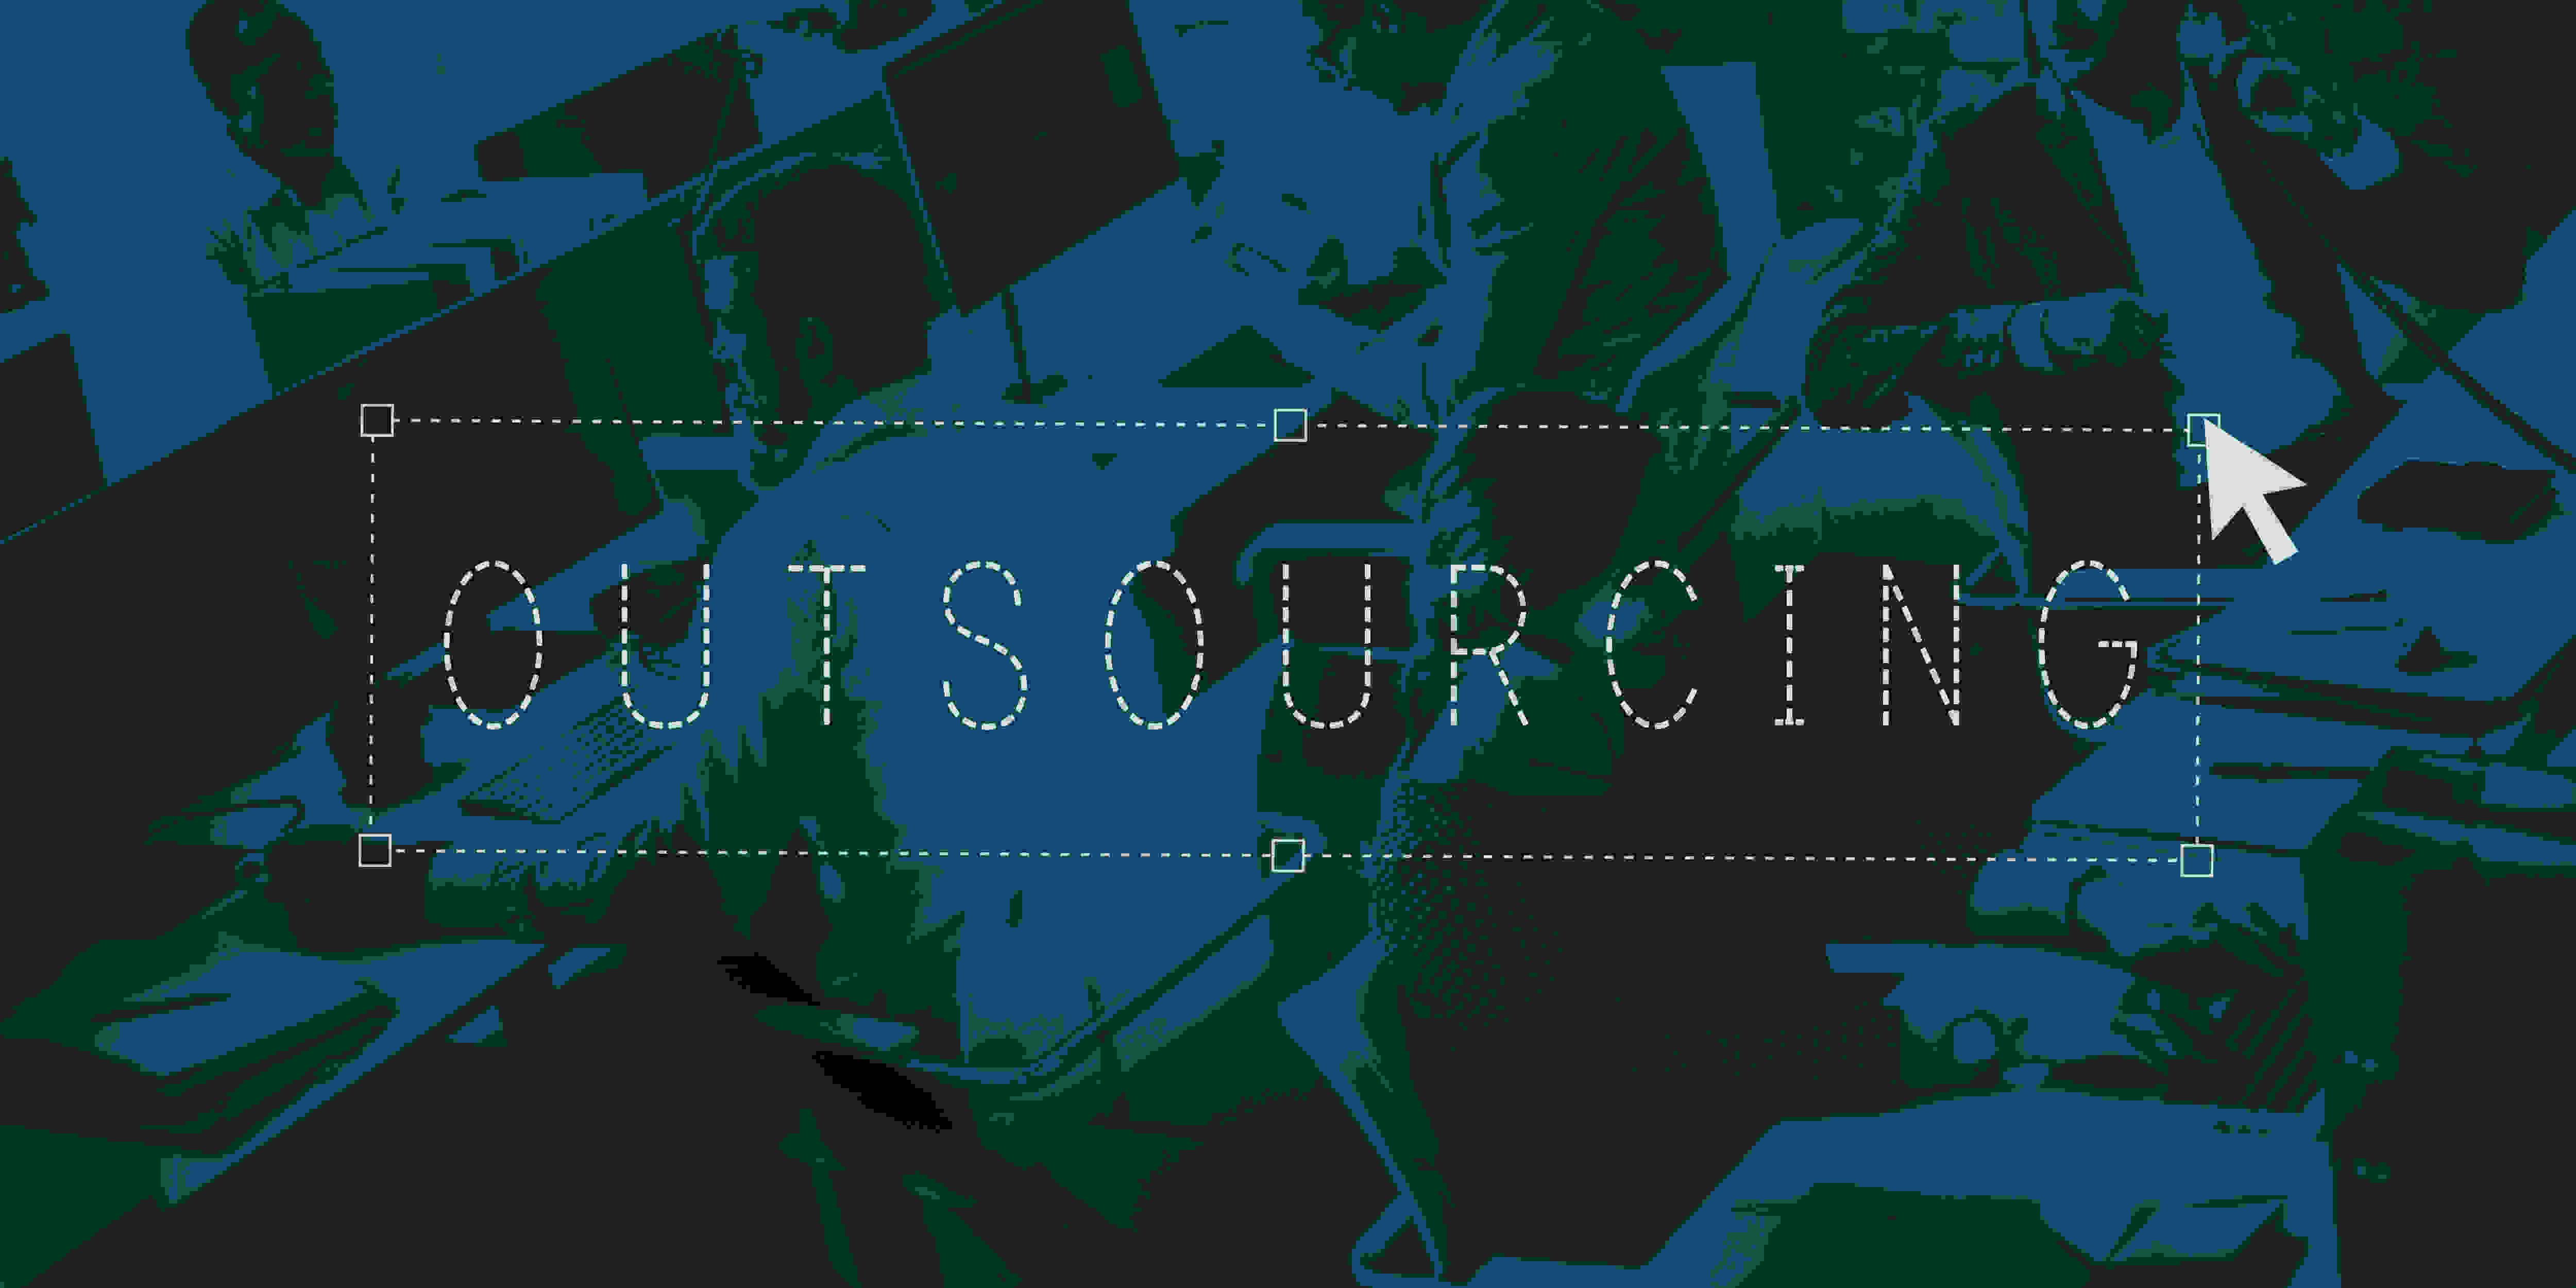 Outsourcing for software development models